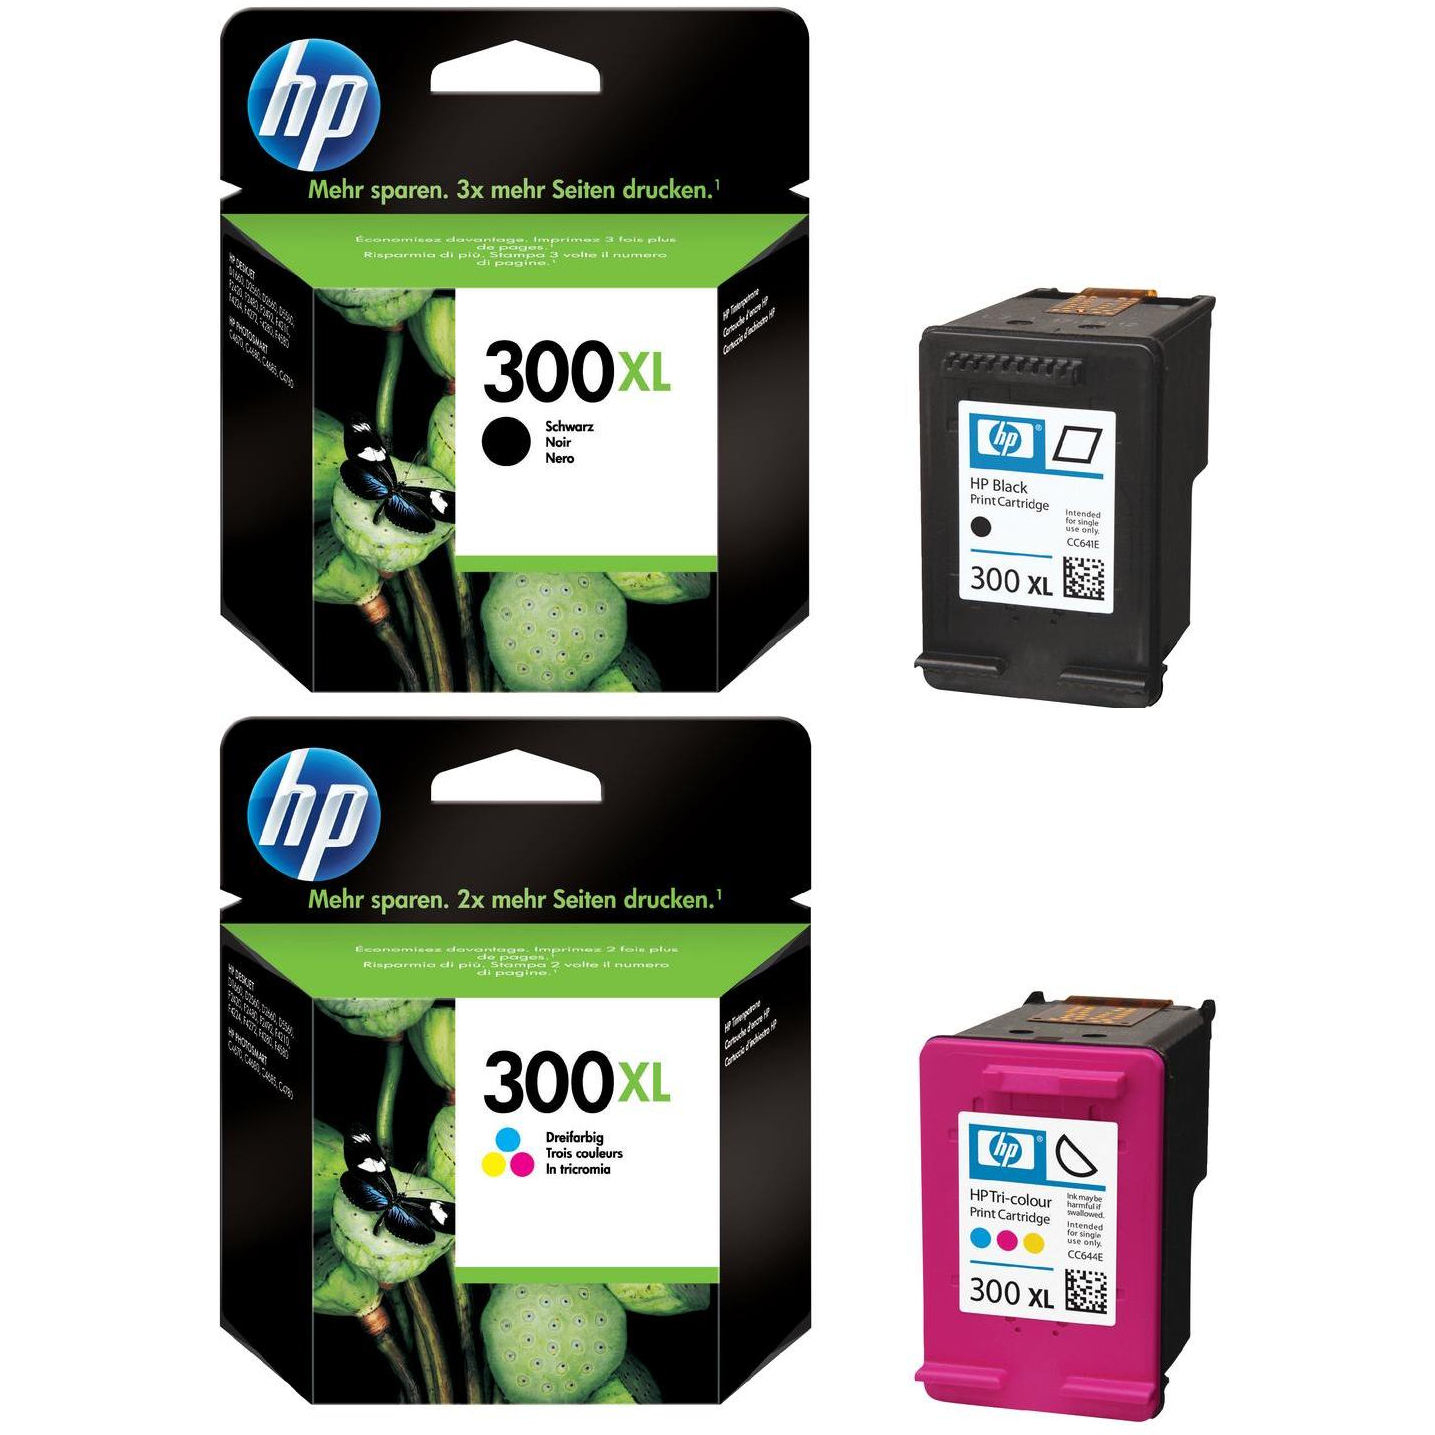 Related to HP Deskjet 4280: HP-300XL-Pack